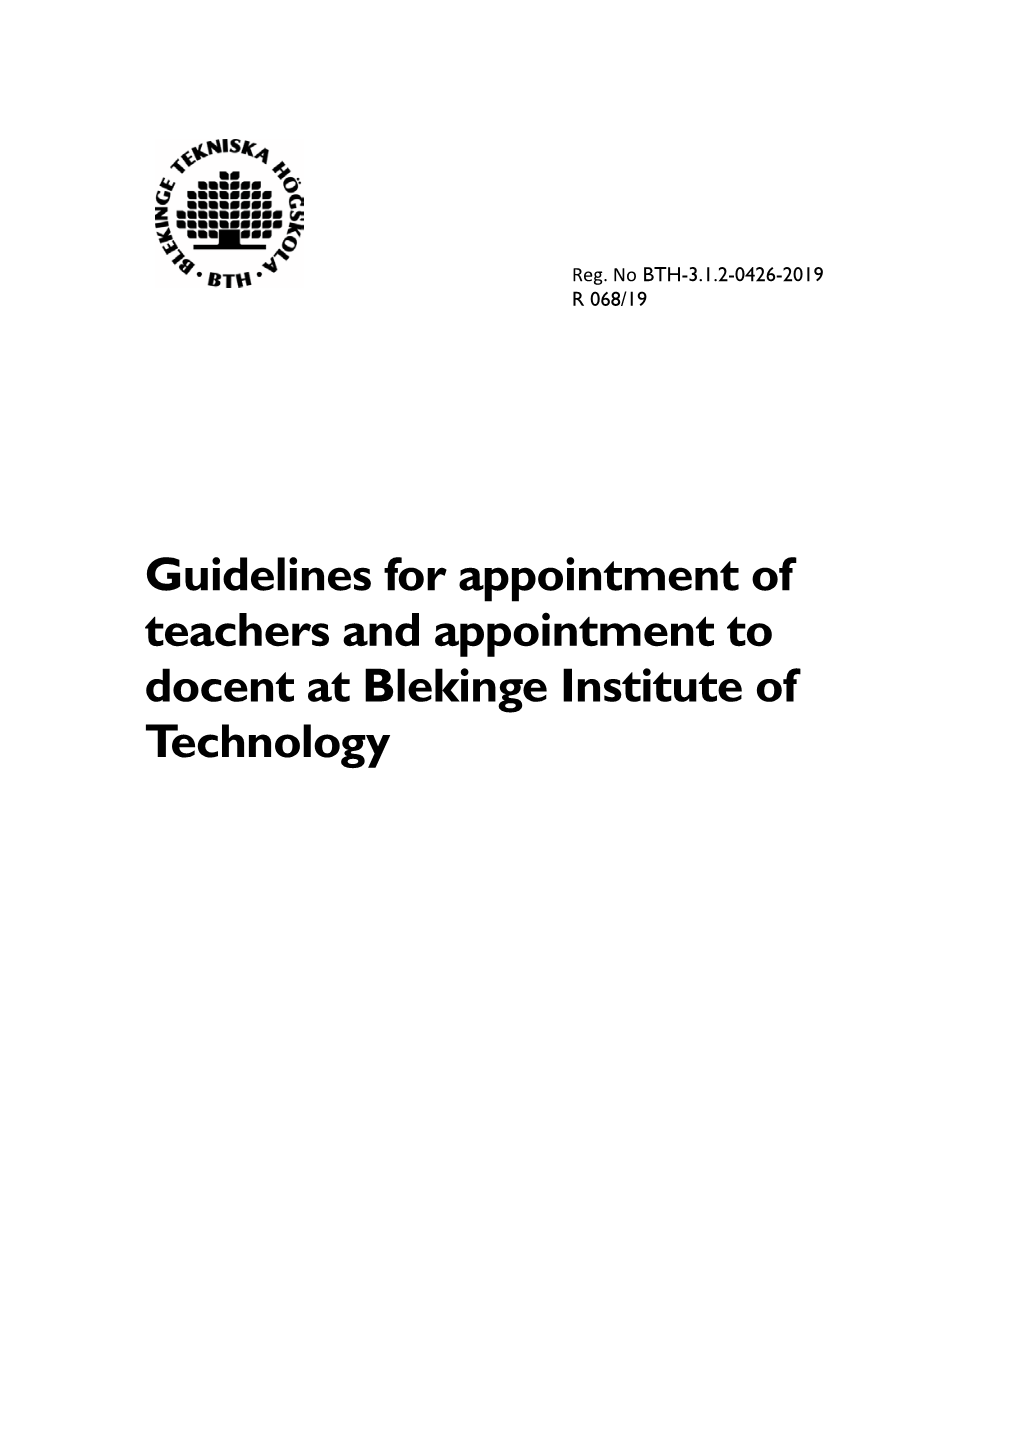 Guidelines for Appointment of Teachers and Appointment to Docent